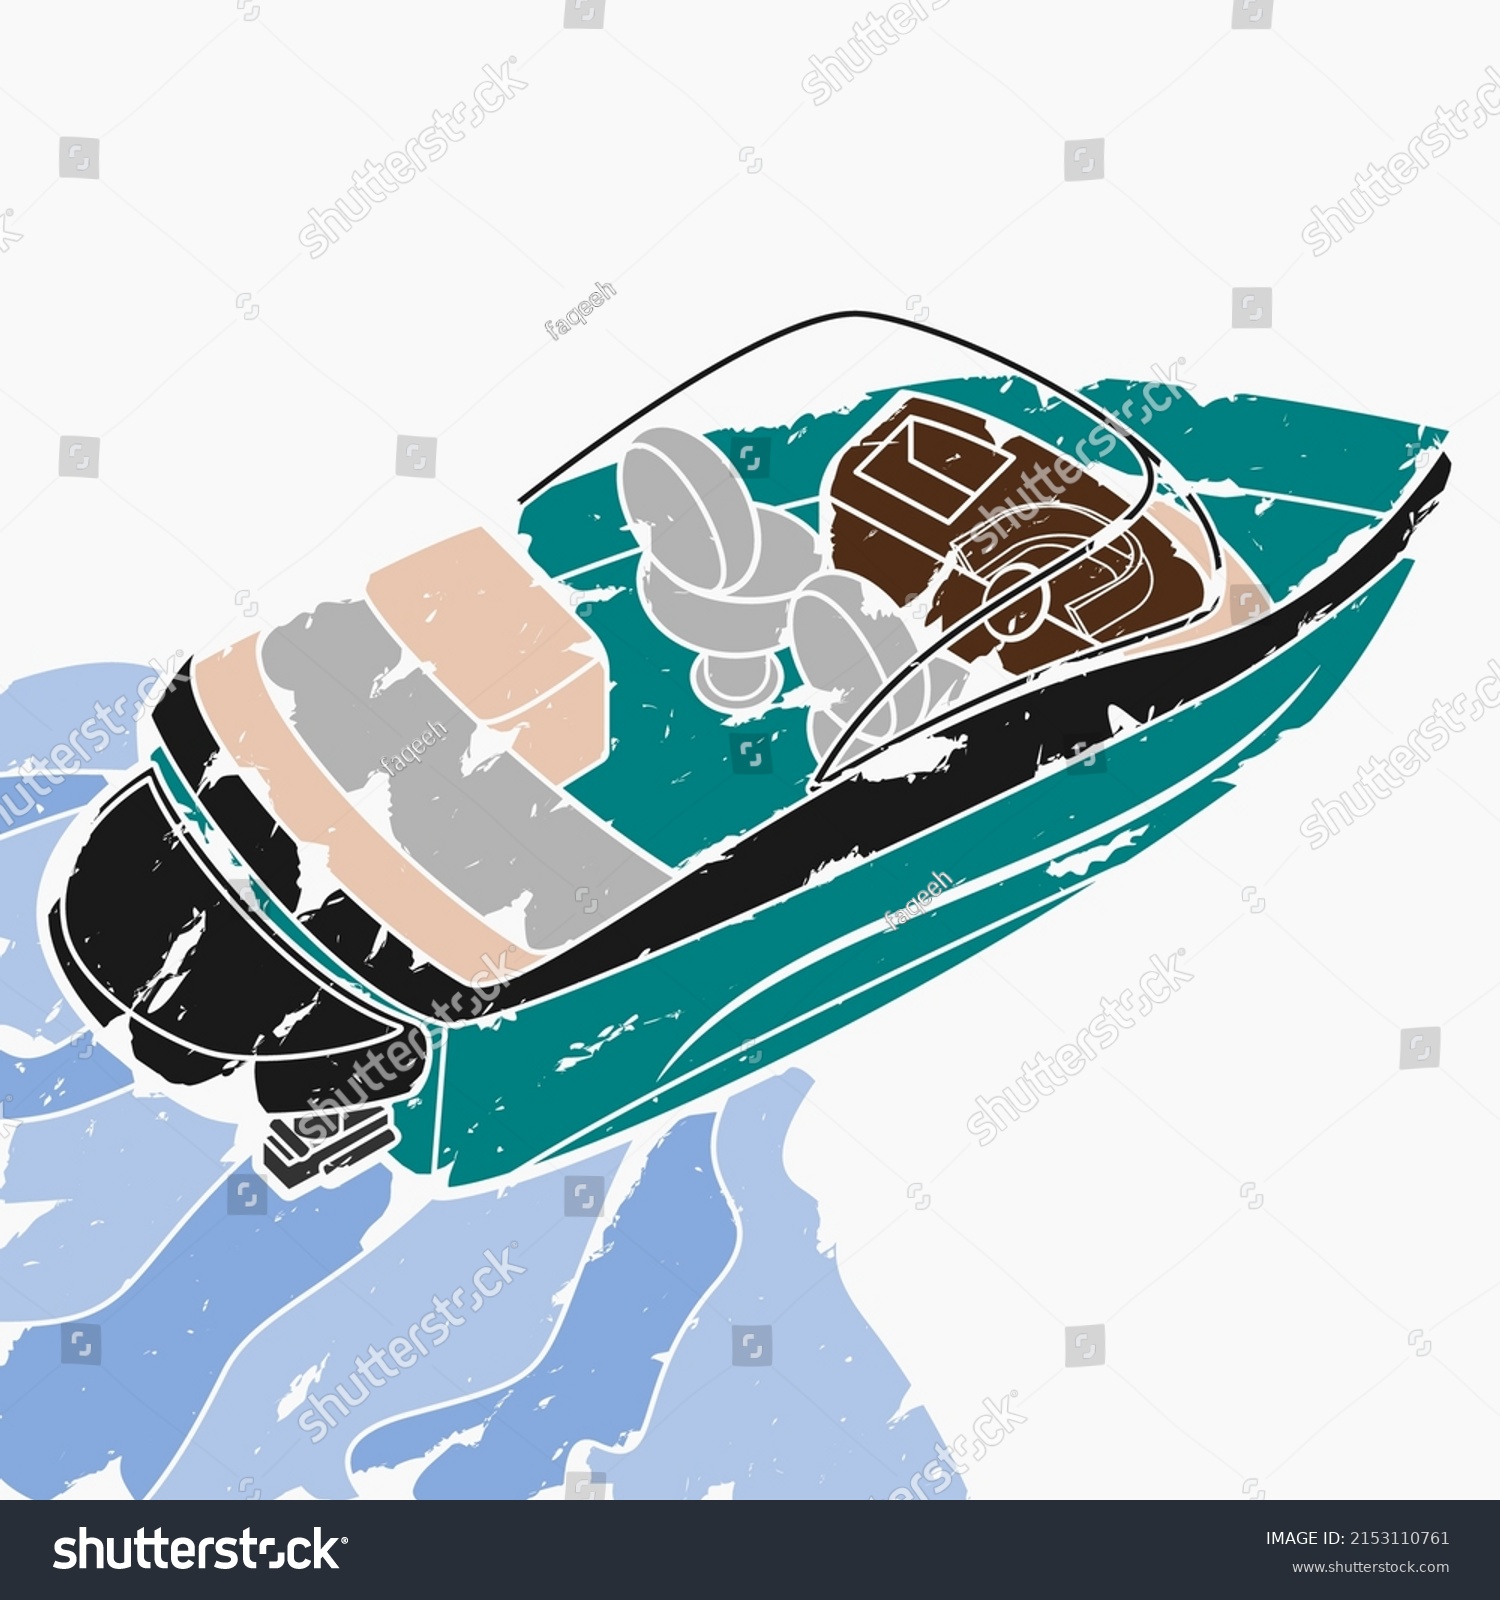 SVG of Editable Top Back Oblique View American Bowrider Boat on Water Vector Illustration in Brush Strokes Style for Artwork Element of Transportation or Recreation Related Design svg